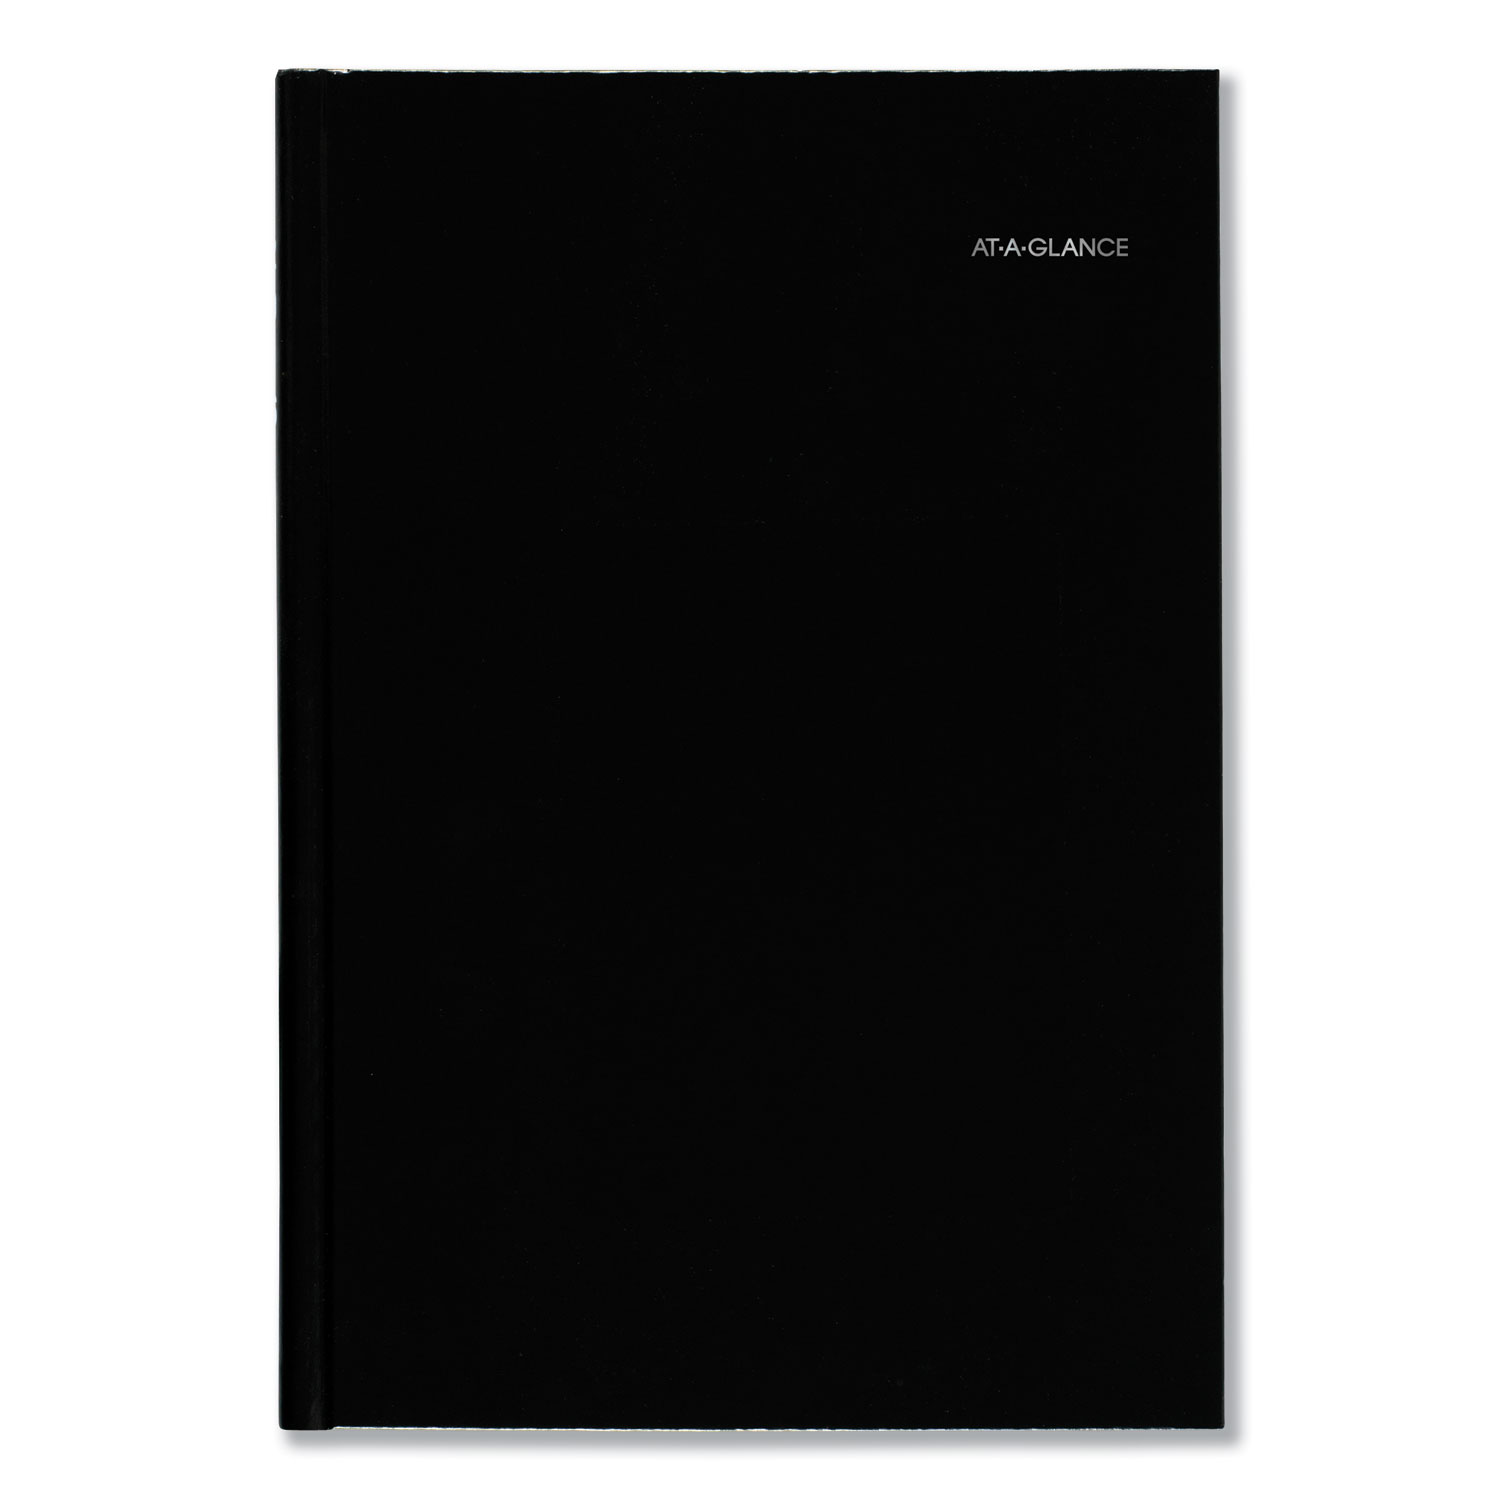  AT-A-GLANCE G470H00 Hard-Cover Monthly Planner, 11 3/4 x 7 7/8, Black, 2019-2021 (AAGG470H00) 